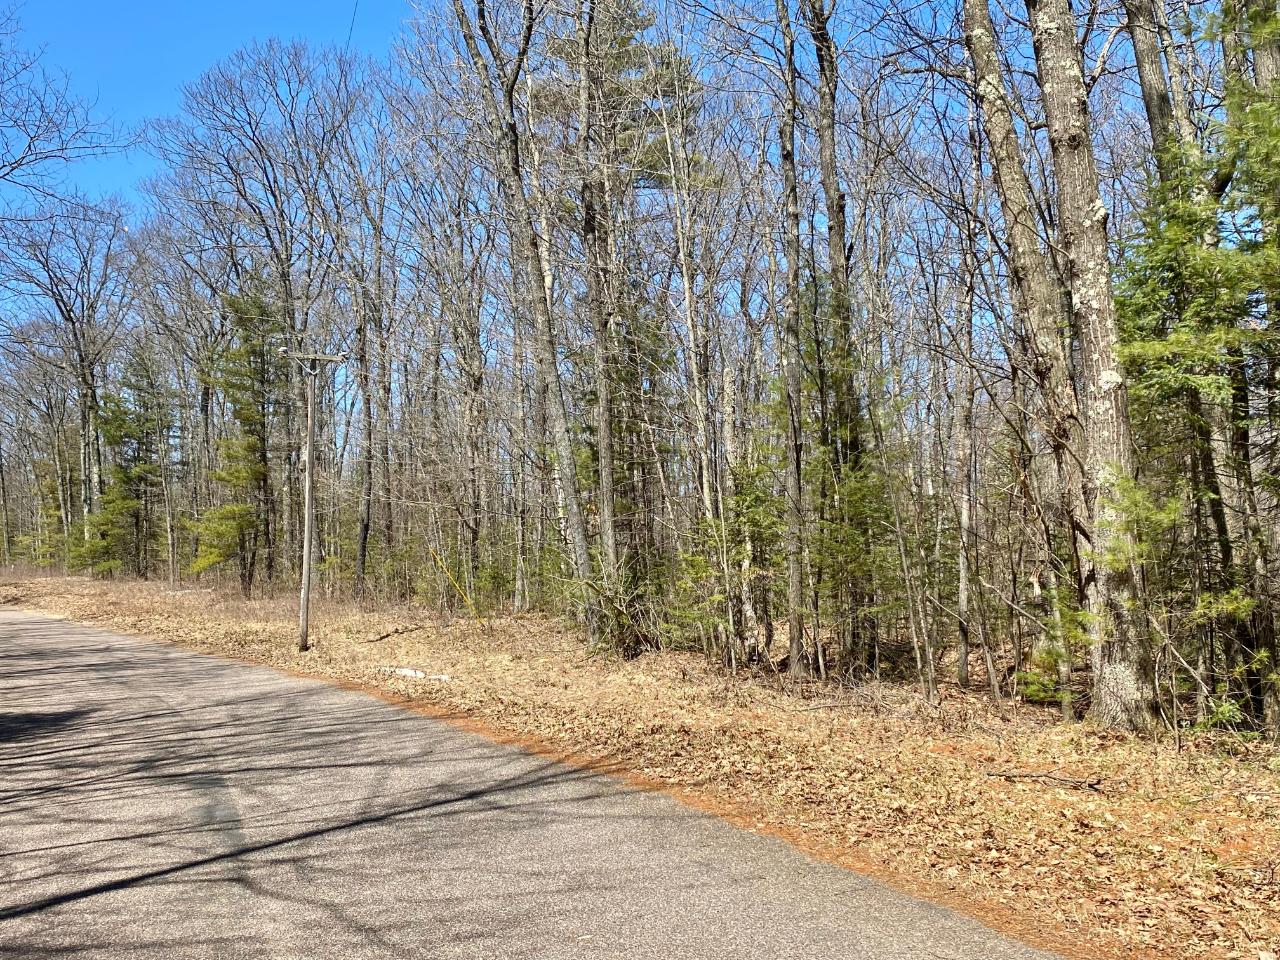 Here is a rare opportunity to buy an entire subdivision with deeded access to a full rec lake! Located closely to Pokegama Lake and just a short way from the private boat launch, this is a quiet and wooded area ready to build on or just enjoy for more space and privacy. 28.27 acres with little to no neighbors and a large body of waters to enjoy. Plenty of options for these 12 lots! This is 12 lots for sale in this subdivision with deeded access to Pokegama Lake. Boat launch is down Oberland Lane on the right.